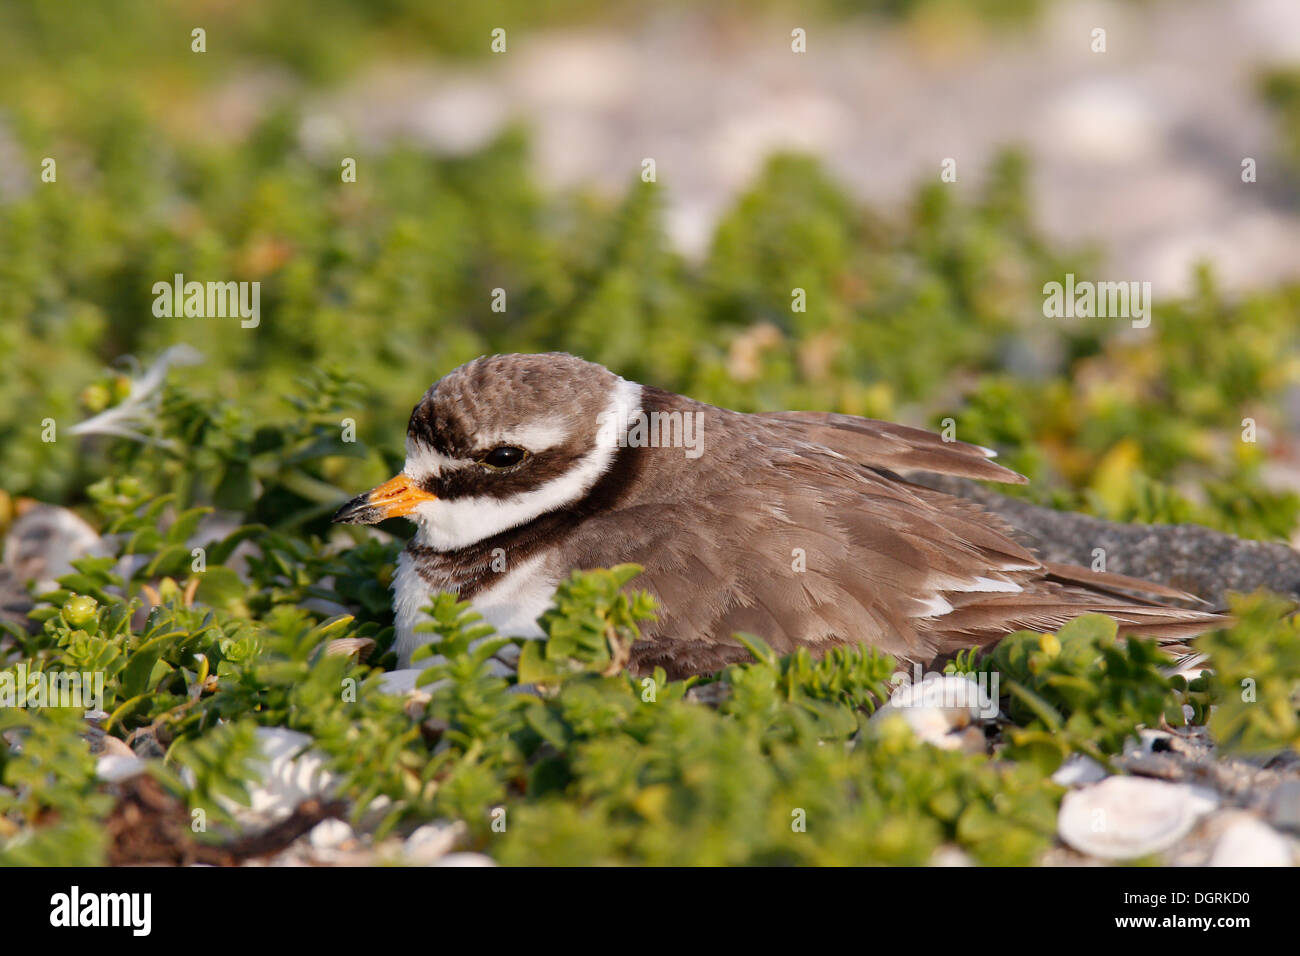 Ringed Plover (Charadrius hiaticula) brooding on a nest, East Frisian Islands, East Frisia, Lower Saxony, Germany Stock Photo